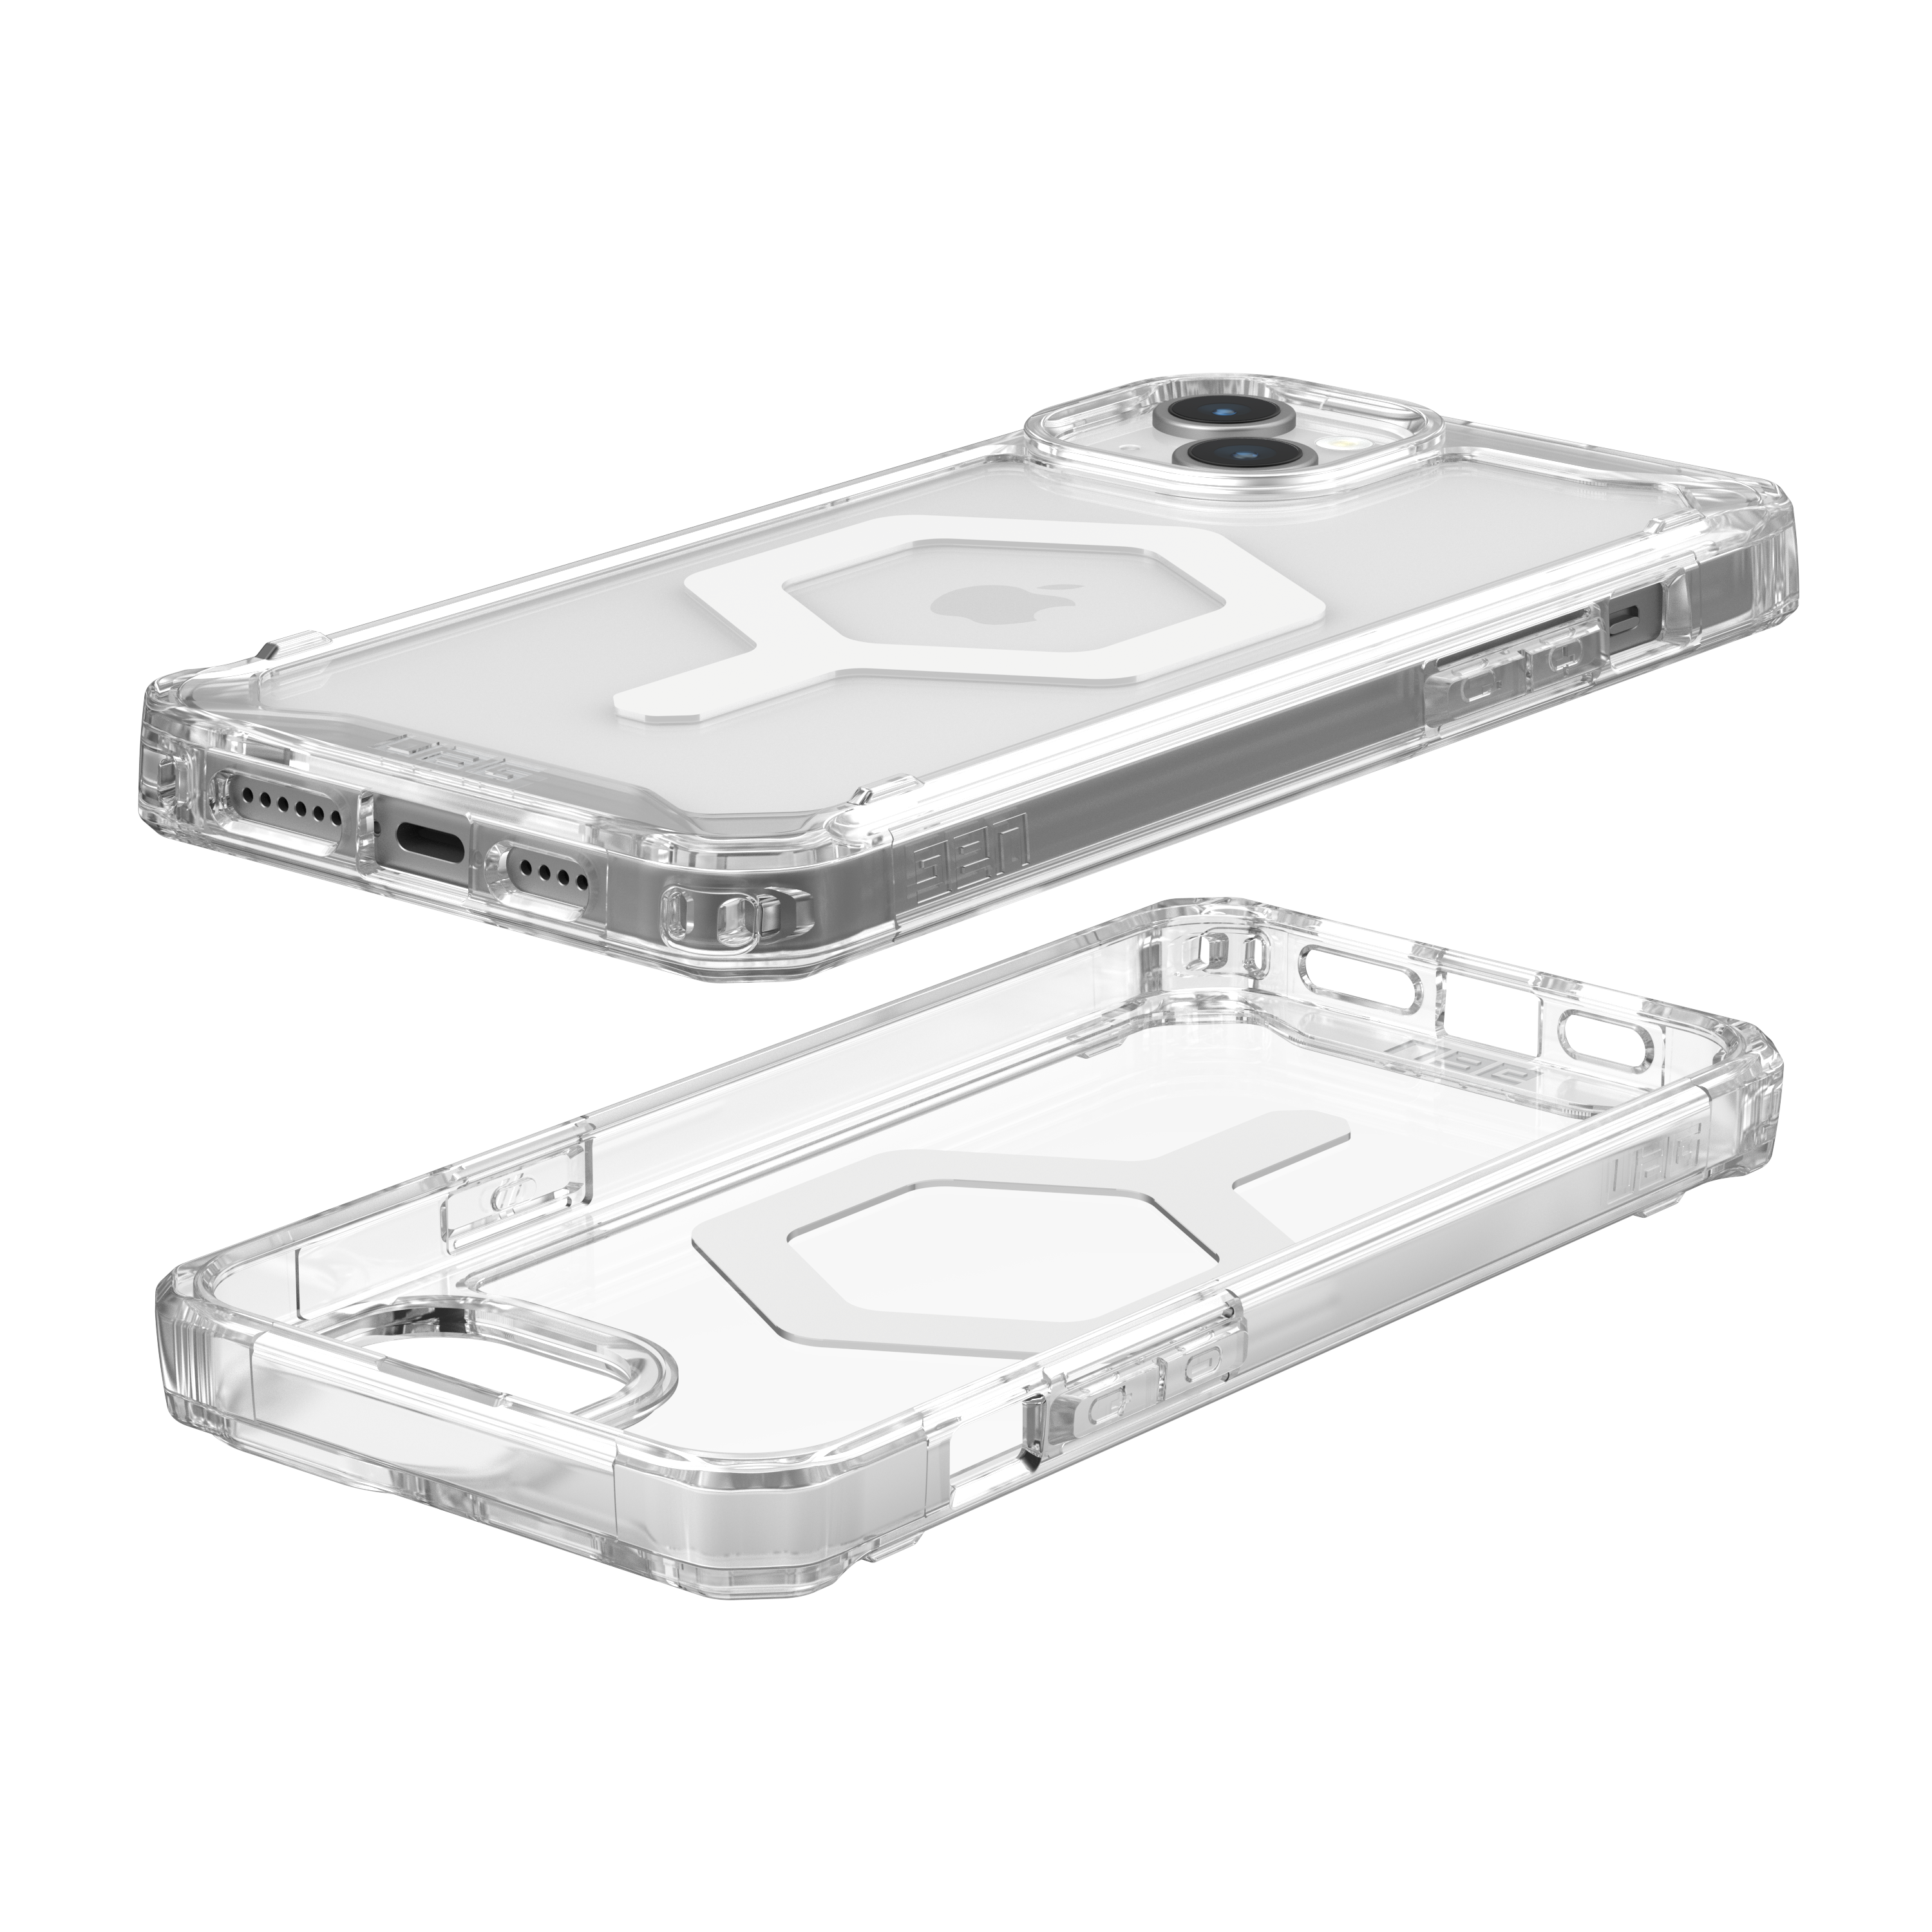 URBAN ARMOR GEAR Plyo ice iPhone Apple, 15 MagSafe, (transparent)/weiß Backcover, Plus